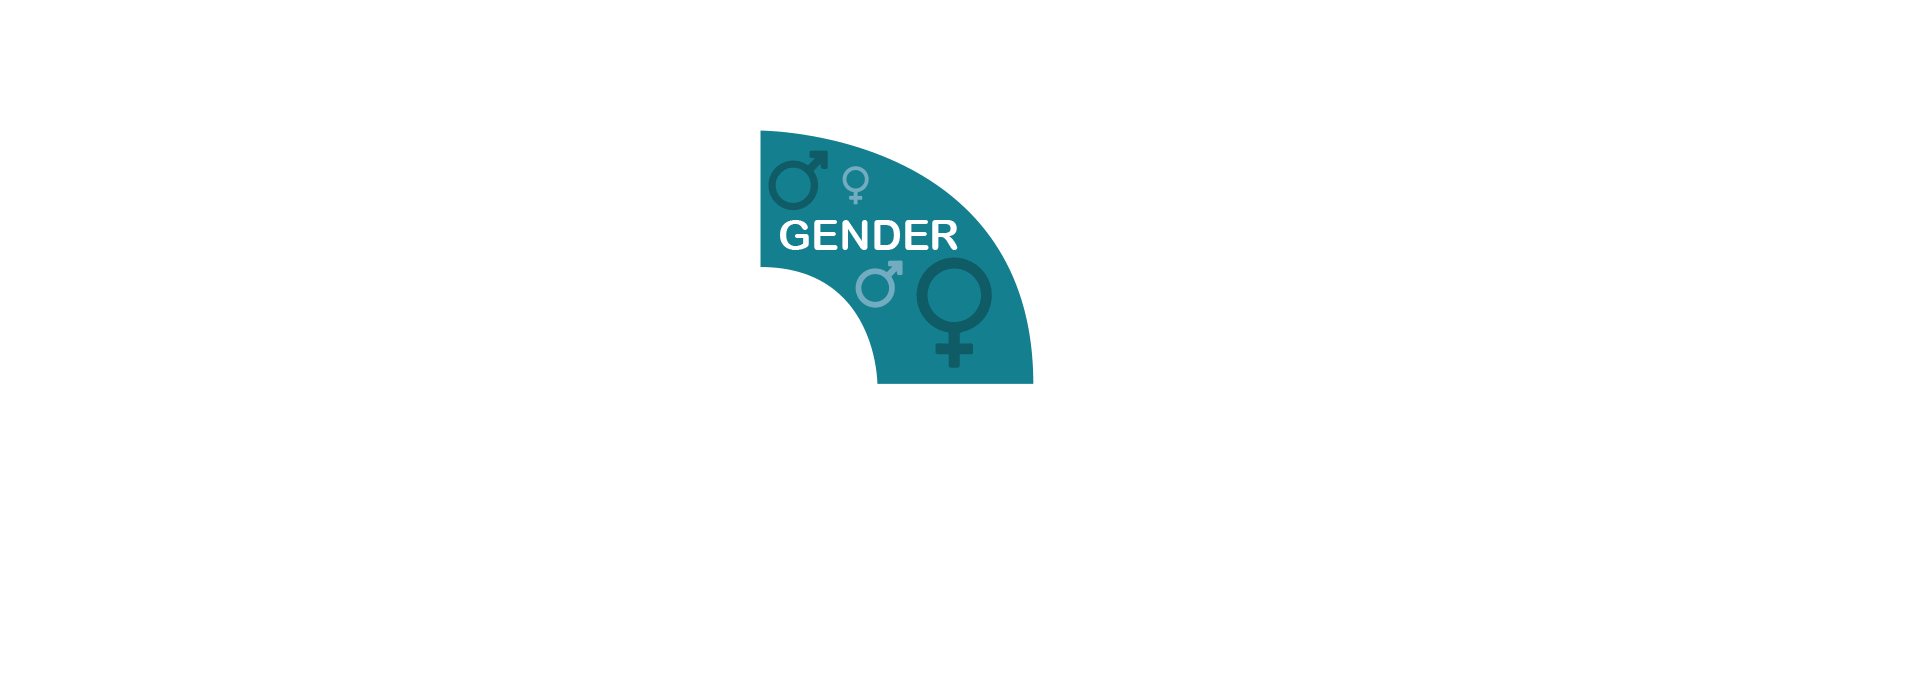 Demographic Customer Profiling by Gender Graphic Element 